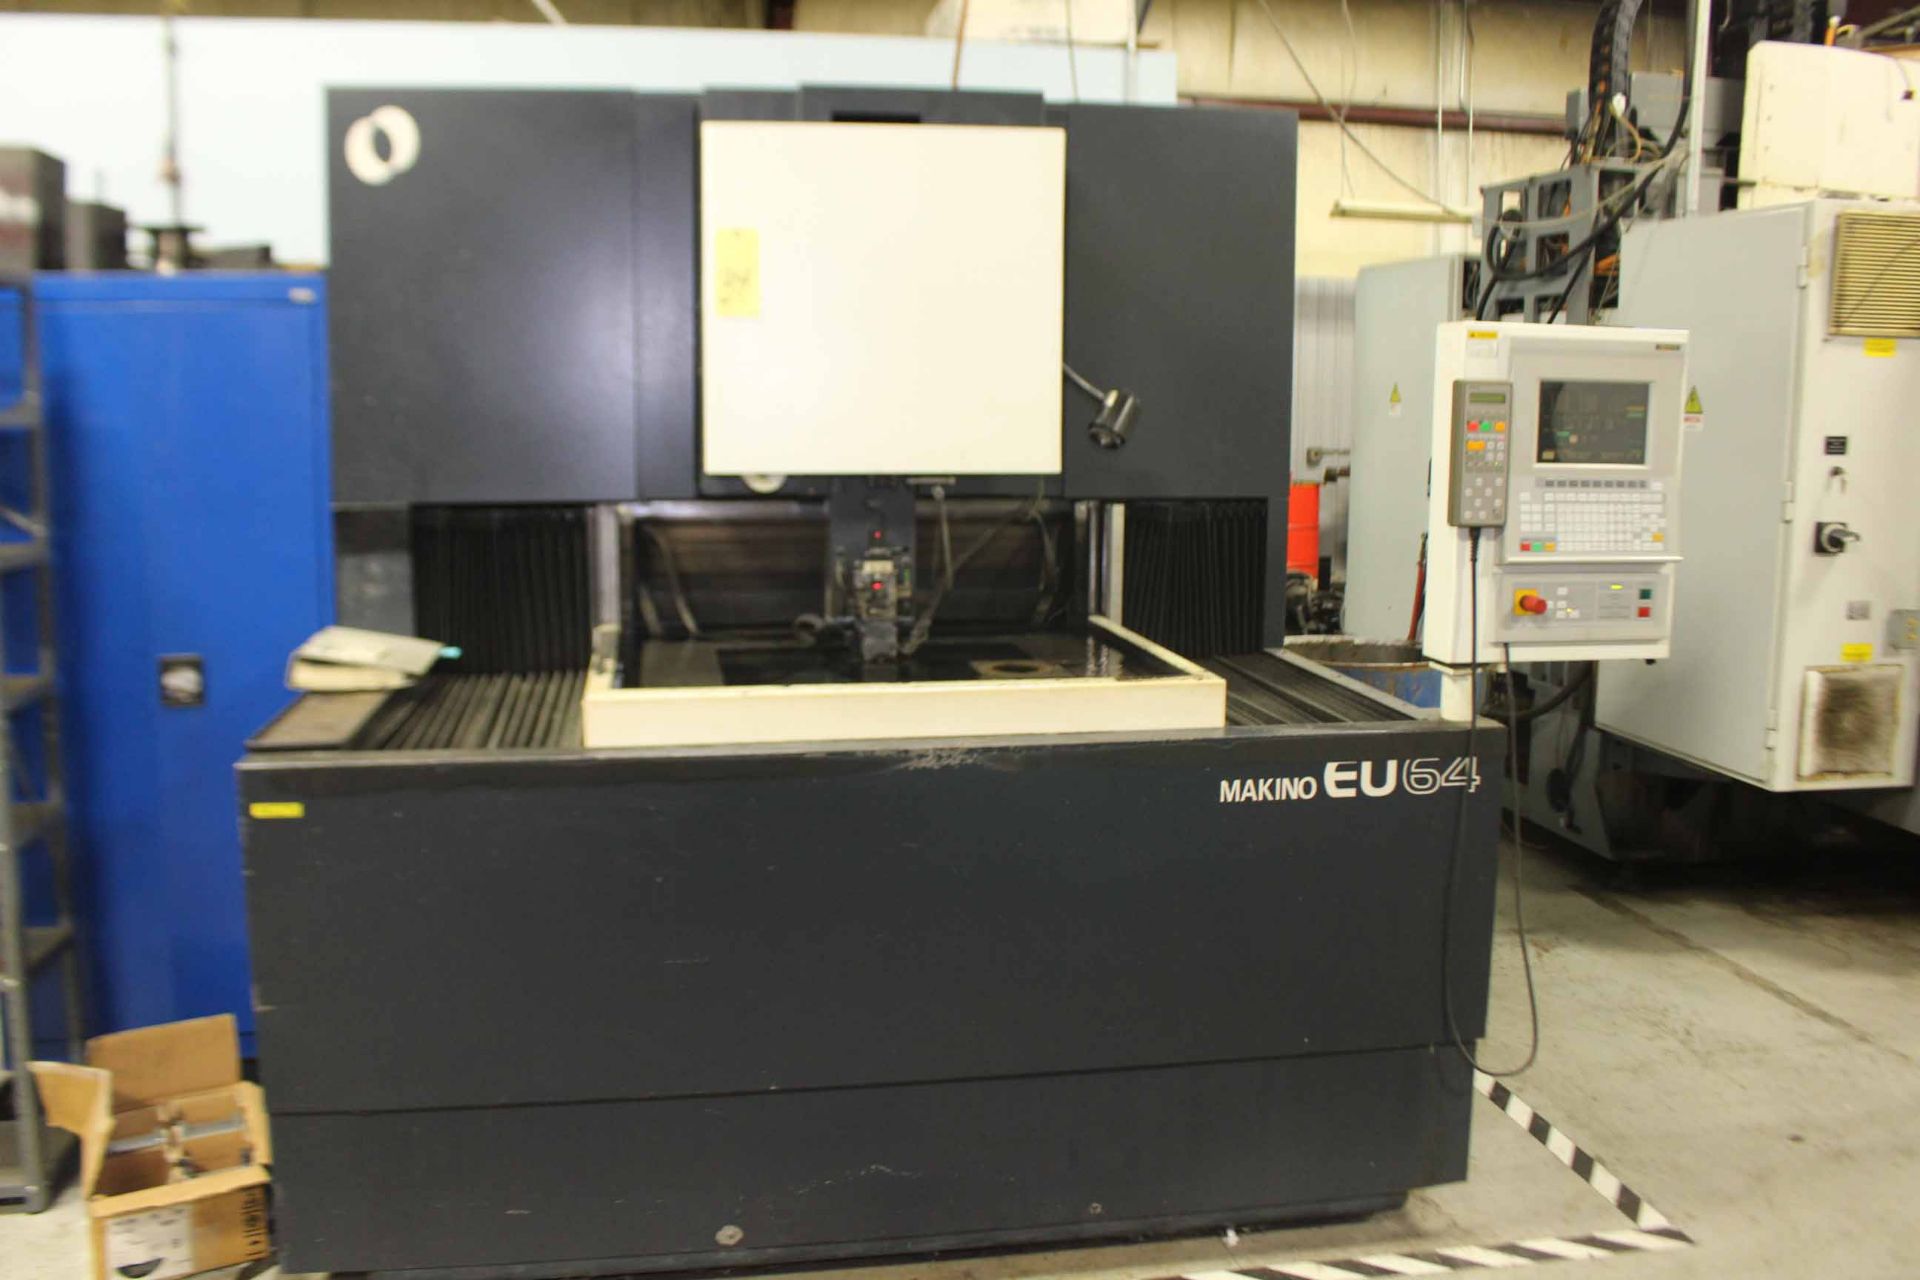 CNC WIRE EDM, MAKINO MDL. EU64 5-AXIS WIRE TYPE, MGW-N CNC control, 32.2” x 23.6” worktable, 37” x